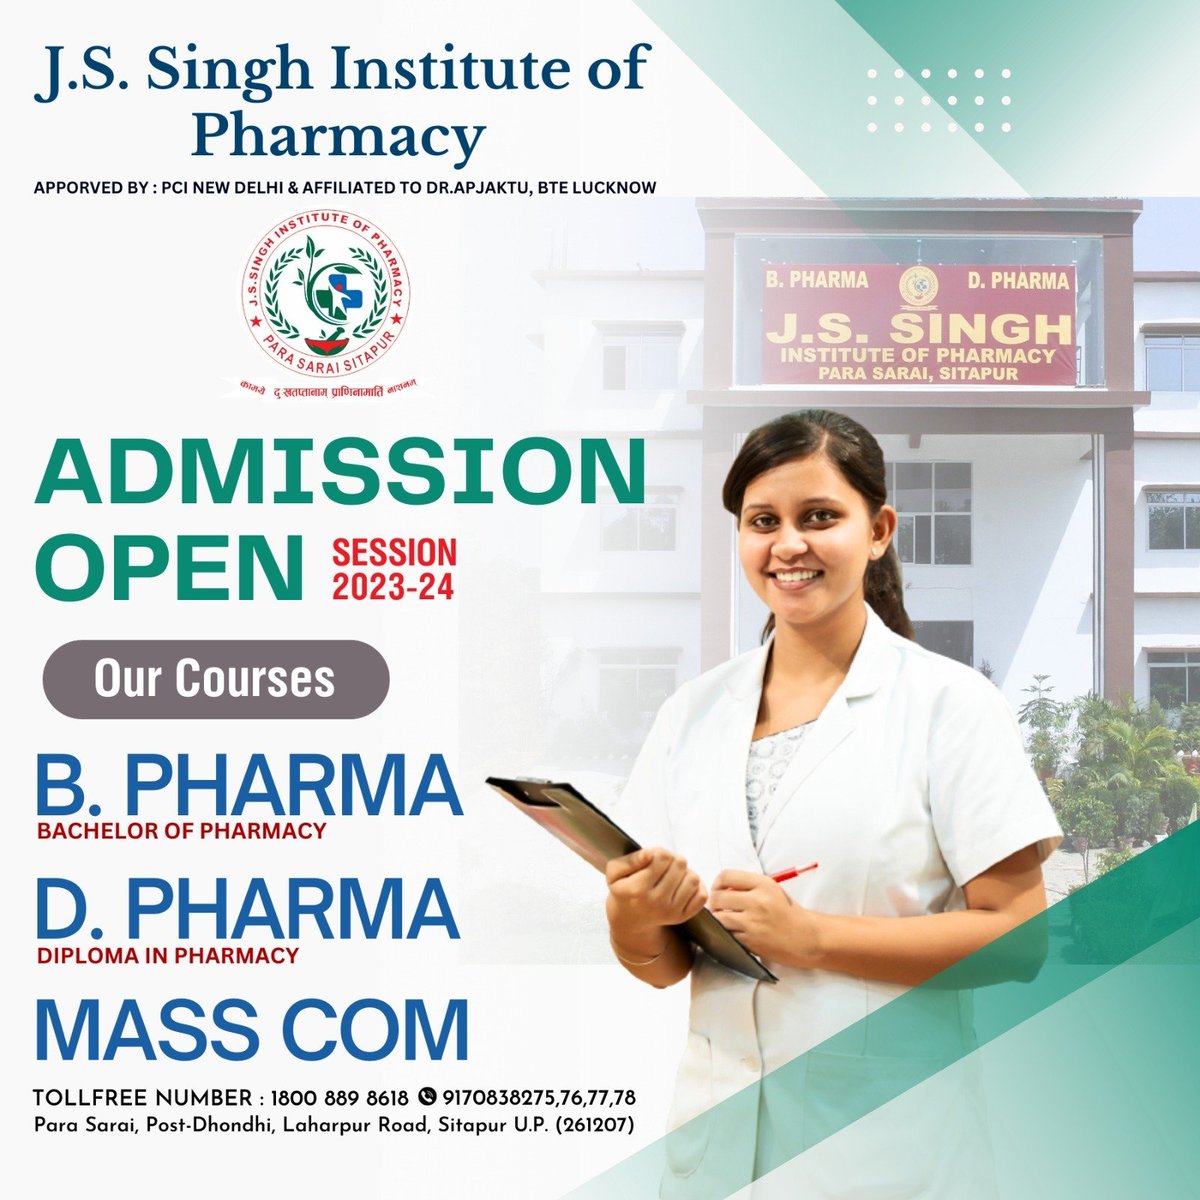 Admission Open💉💊
Session:- 2023-24
J. S. Singh Institute of Pharmacy Sitapur
TOLLFREE :- 1800 889 8618
Contact :- 9170838275, 76, 77, 78
#Admission #pharmacy #parasarai #pharmacycollege #institute #AdmissionsOpen #admissions2023 #pharmacistlife #pharmaceutical #drugs